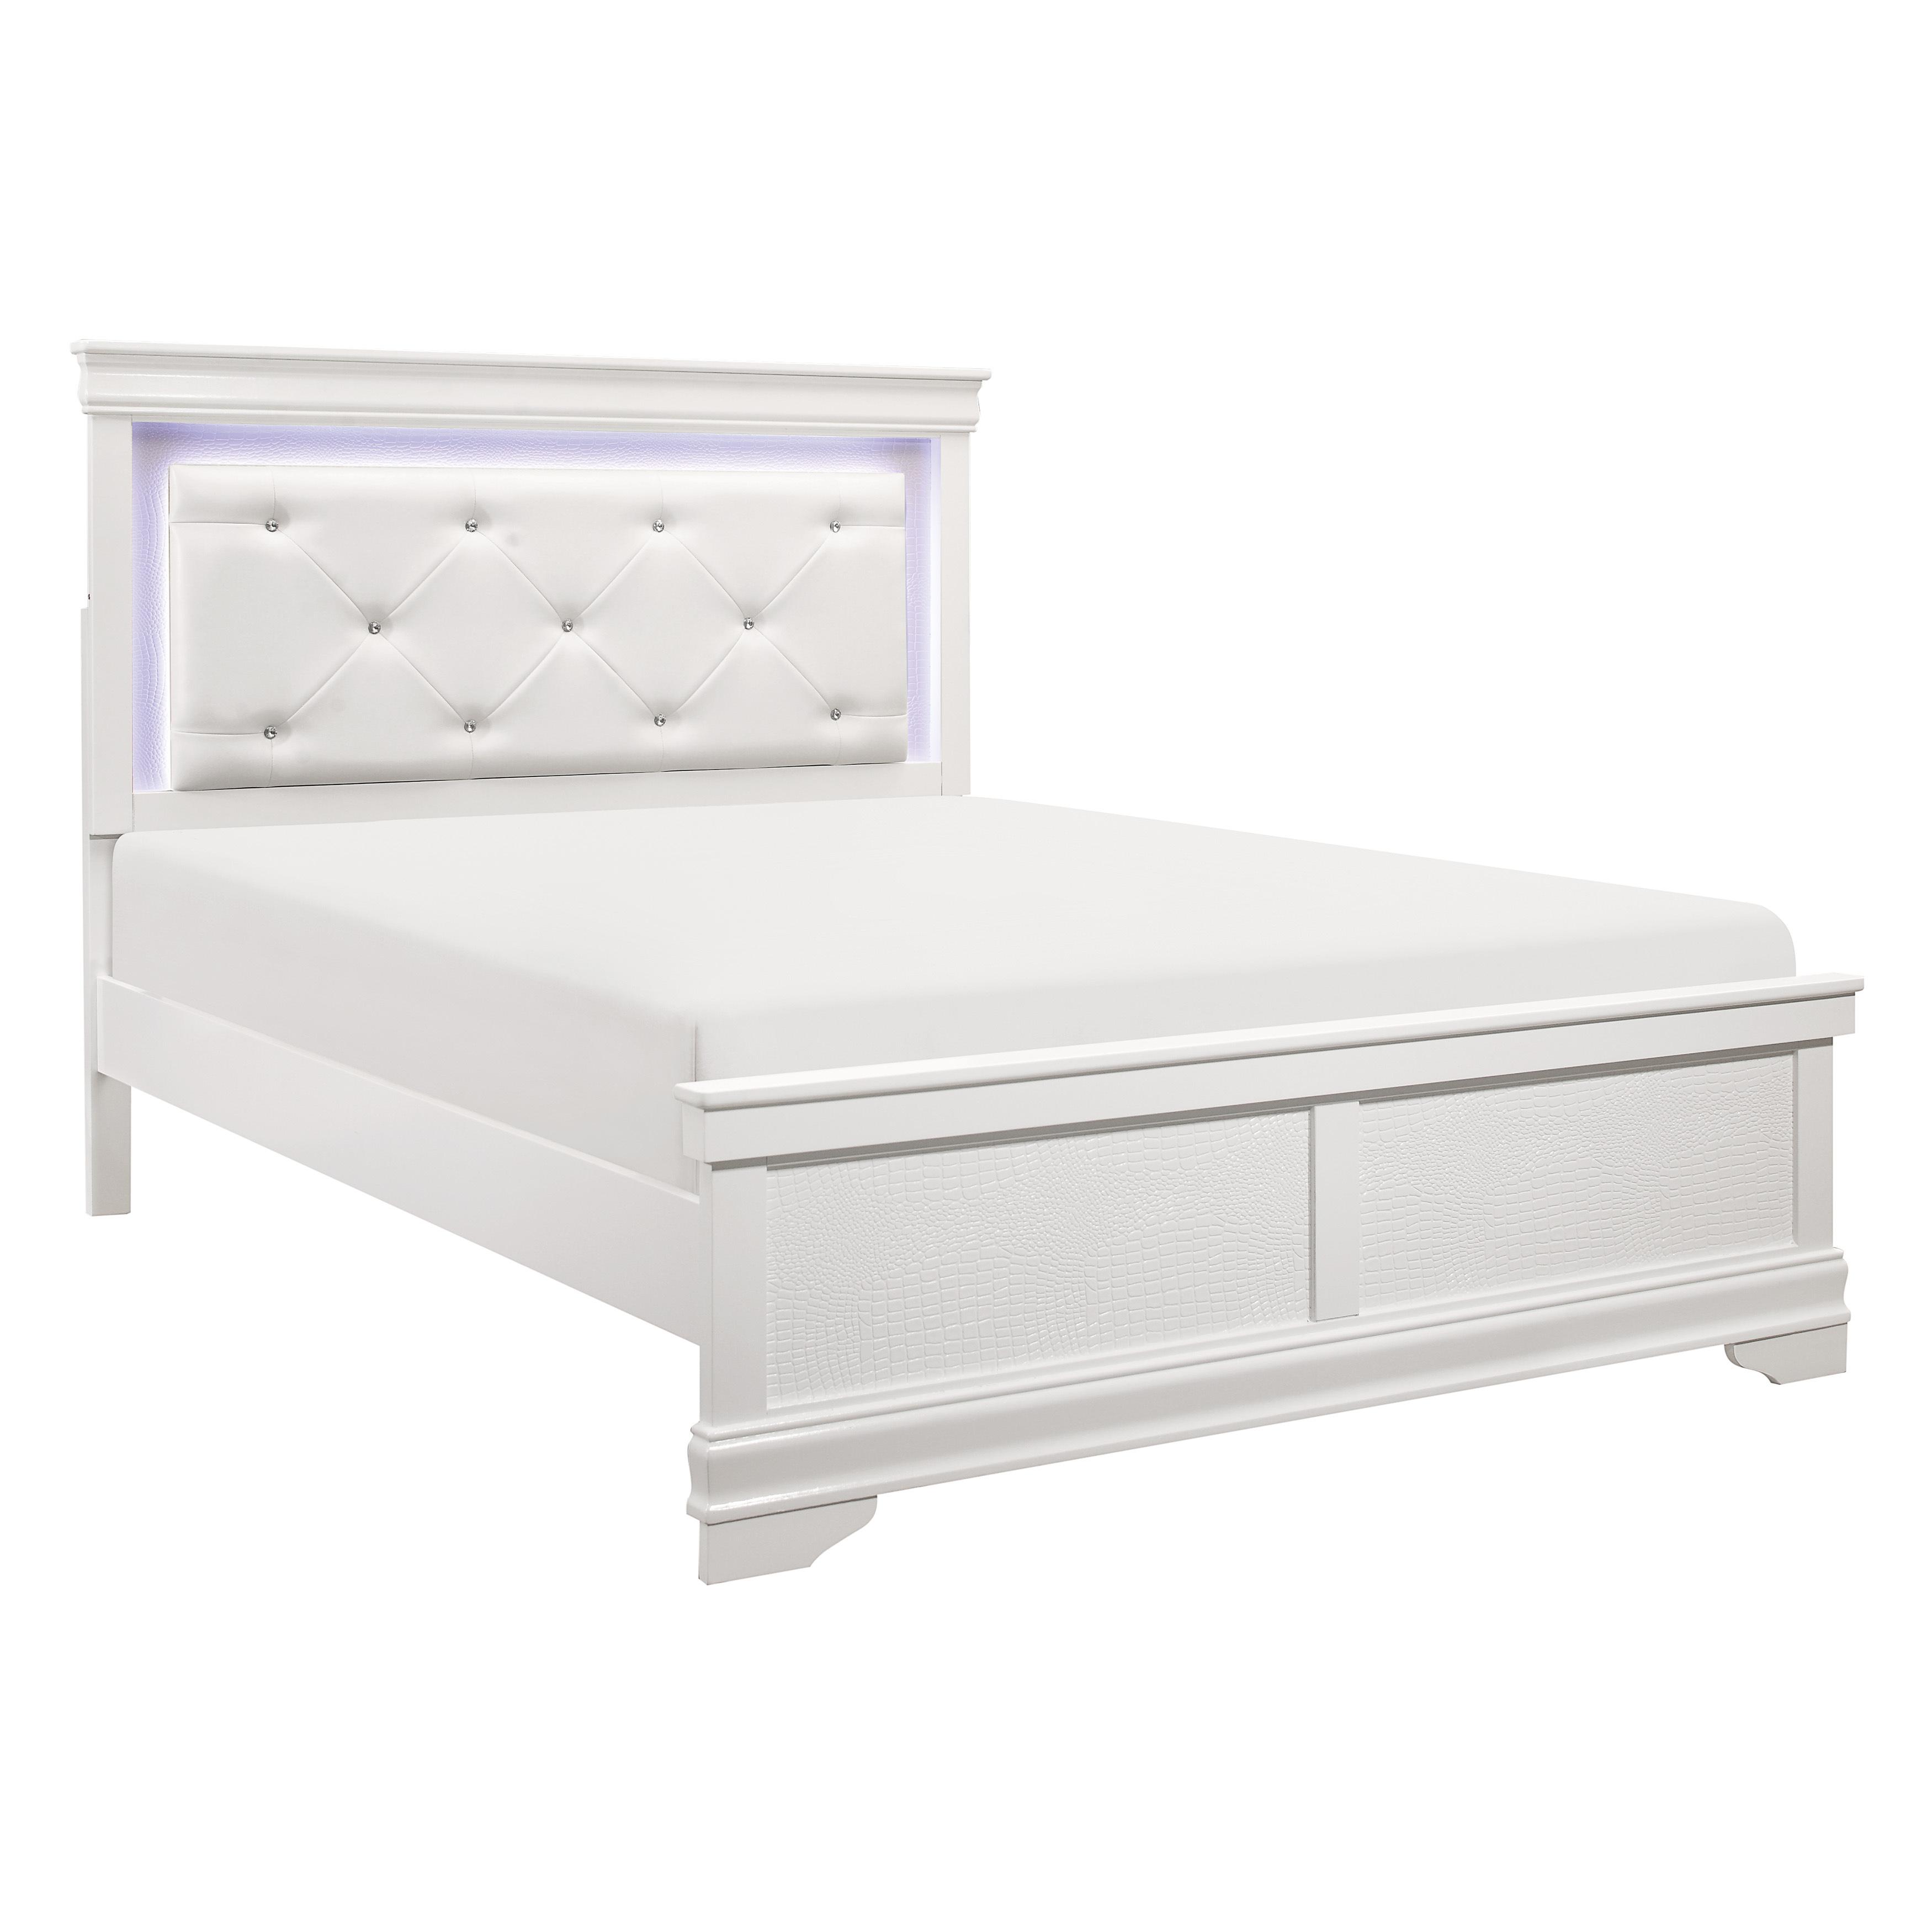 Traditional Bed 1556WT-1* Lana 1556WT-1* in White Faux Leather